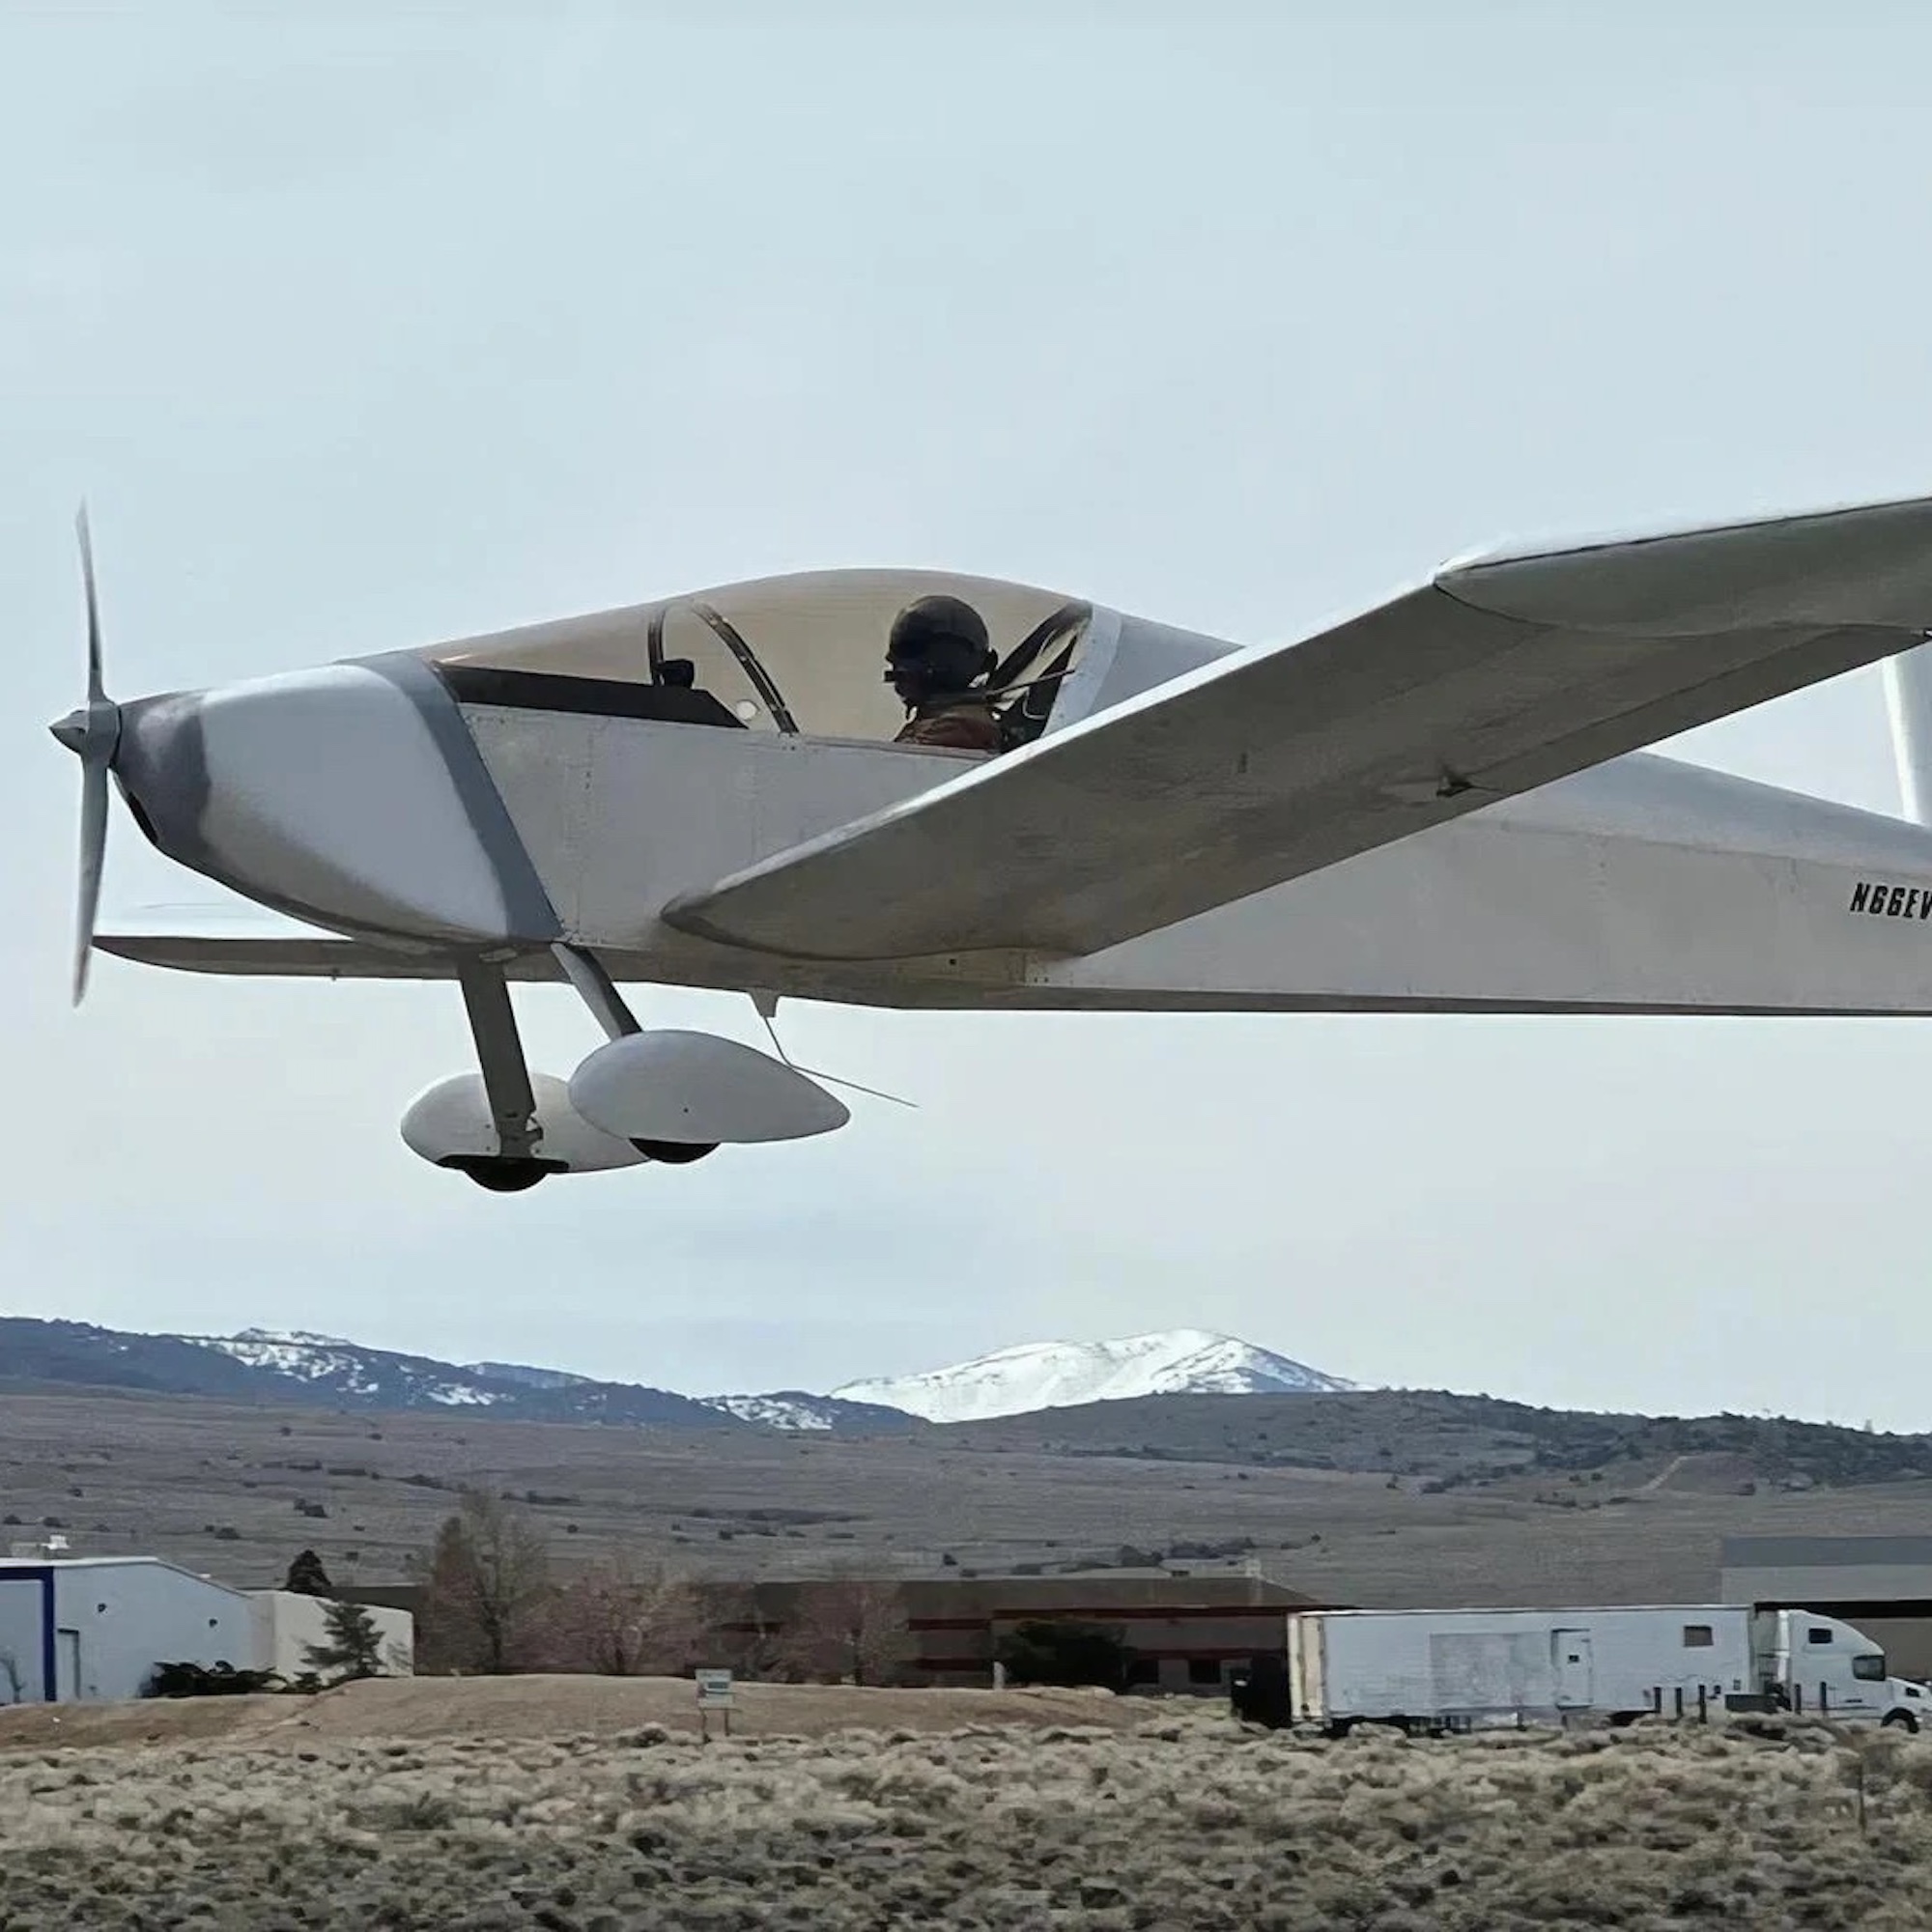 The 'Xenos" - an electric Mootrglider that uses a Zero Motorcycle's powertrain to ferry and hop to decent altitudes. Media sourced from KitPlanes.